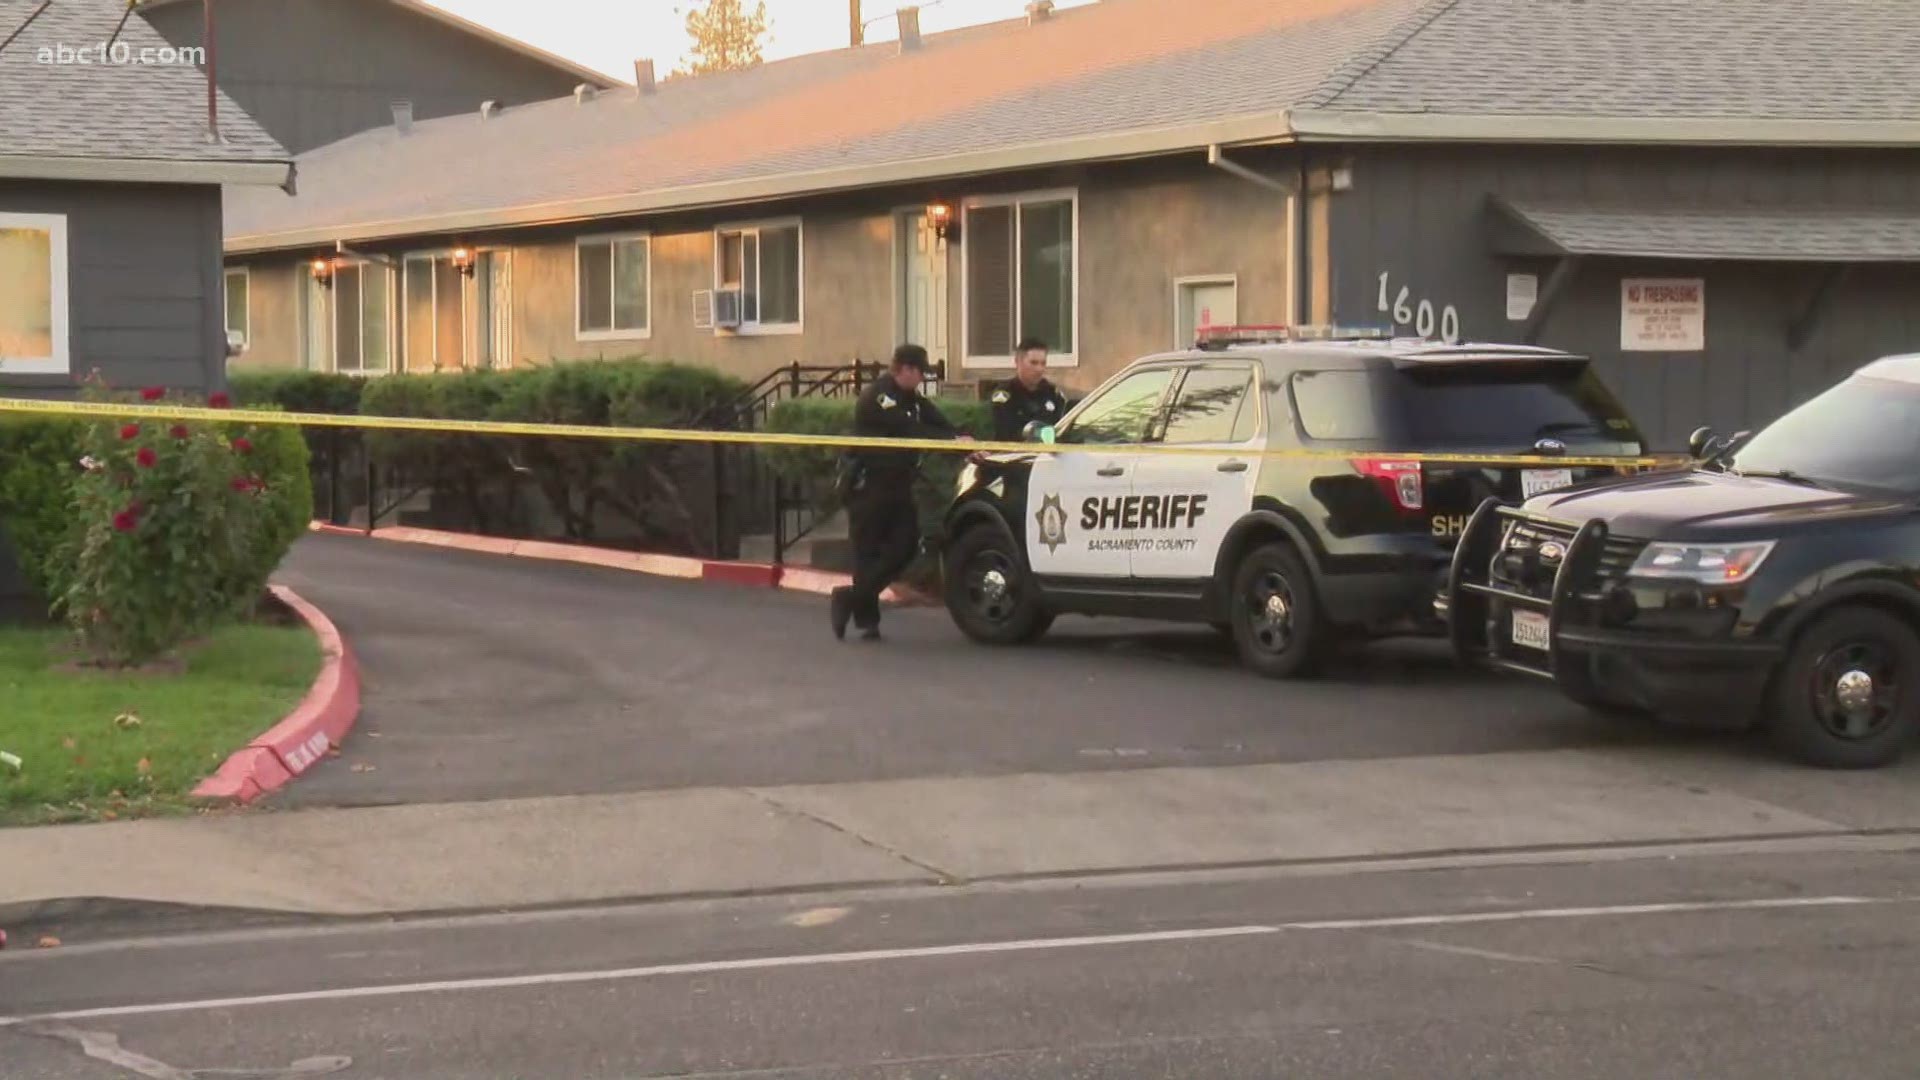 Details are still limited, but Sacramento County Sheriff's deputies have been at the scene of an apartment complex for hours Tuesday morning.